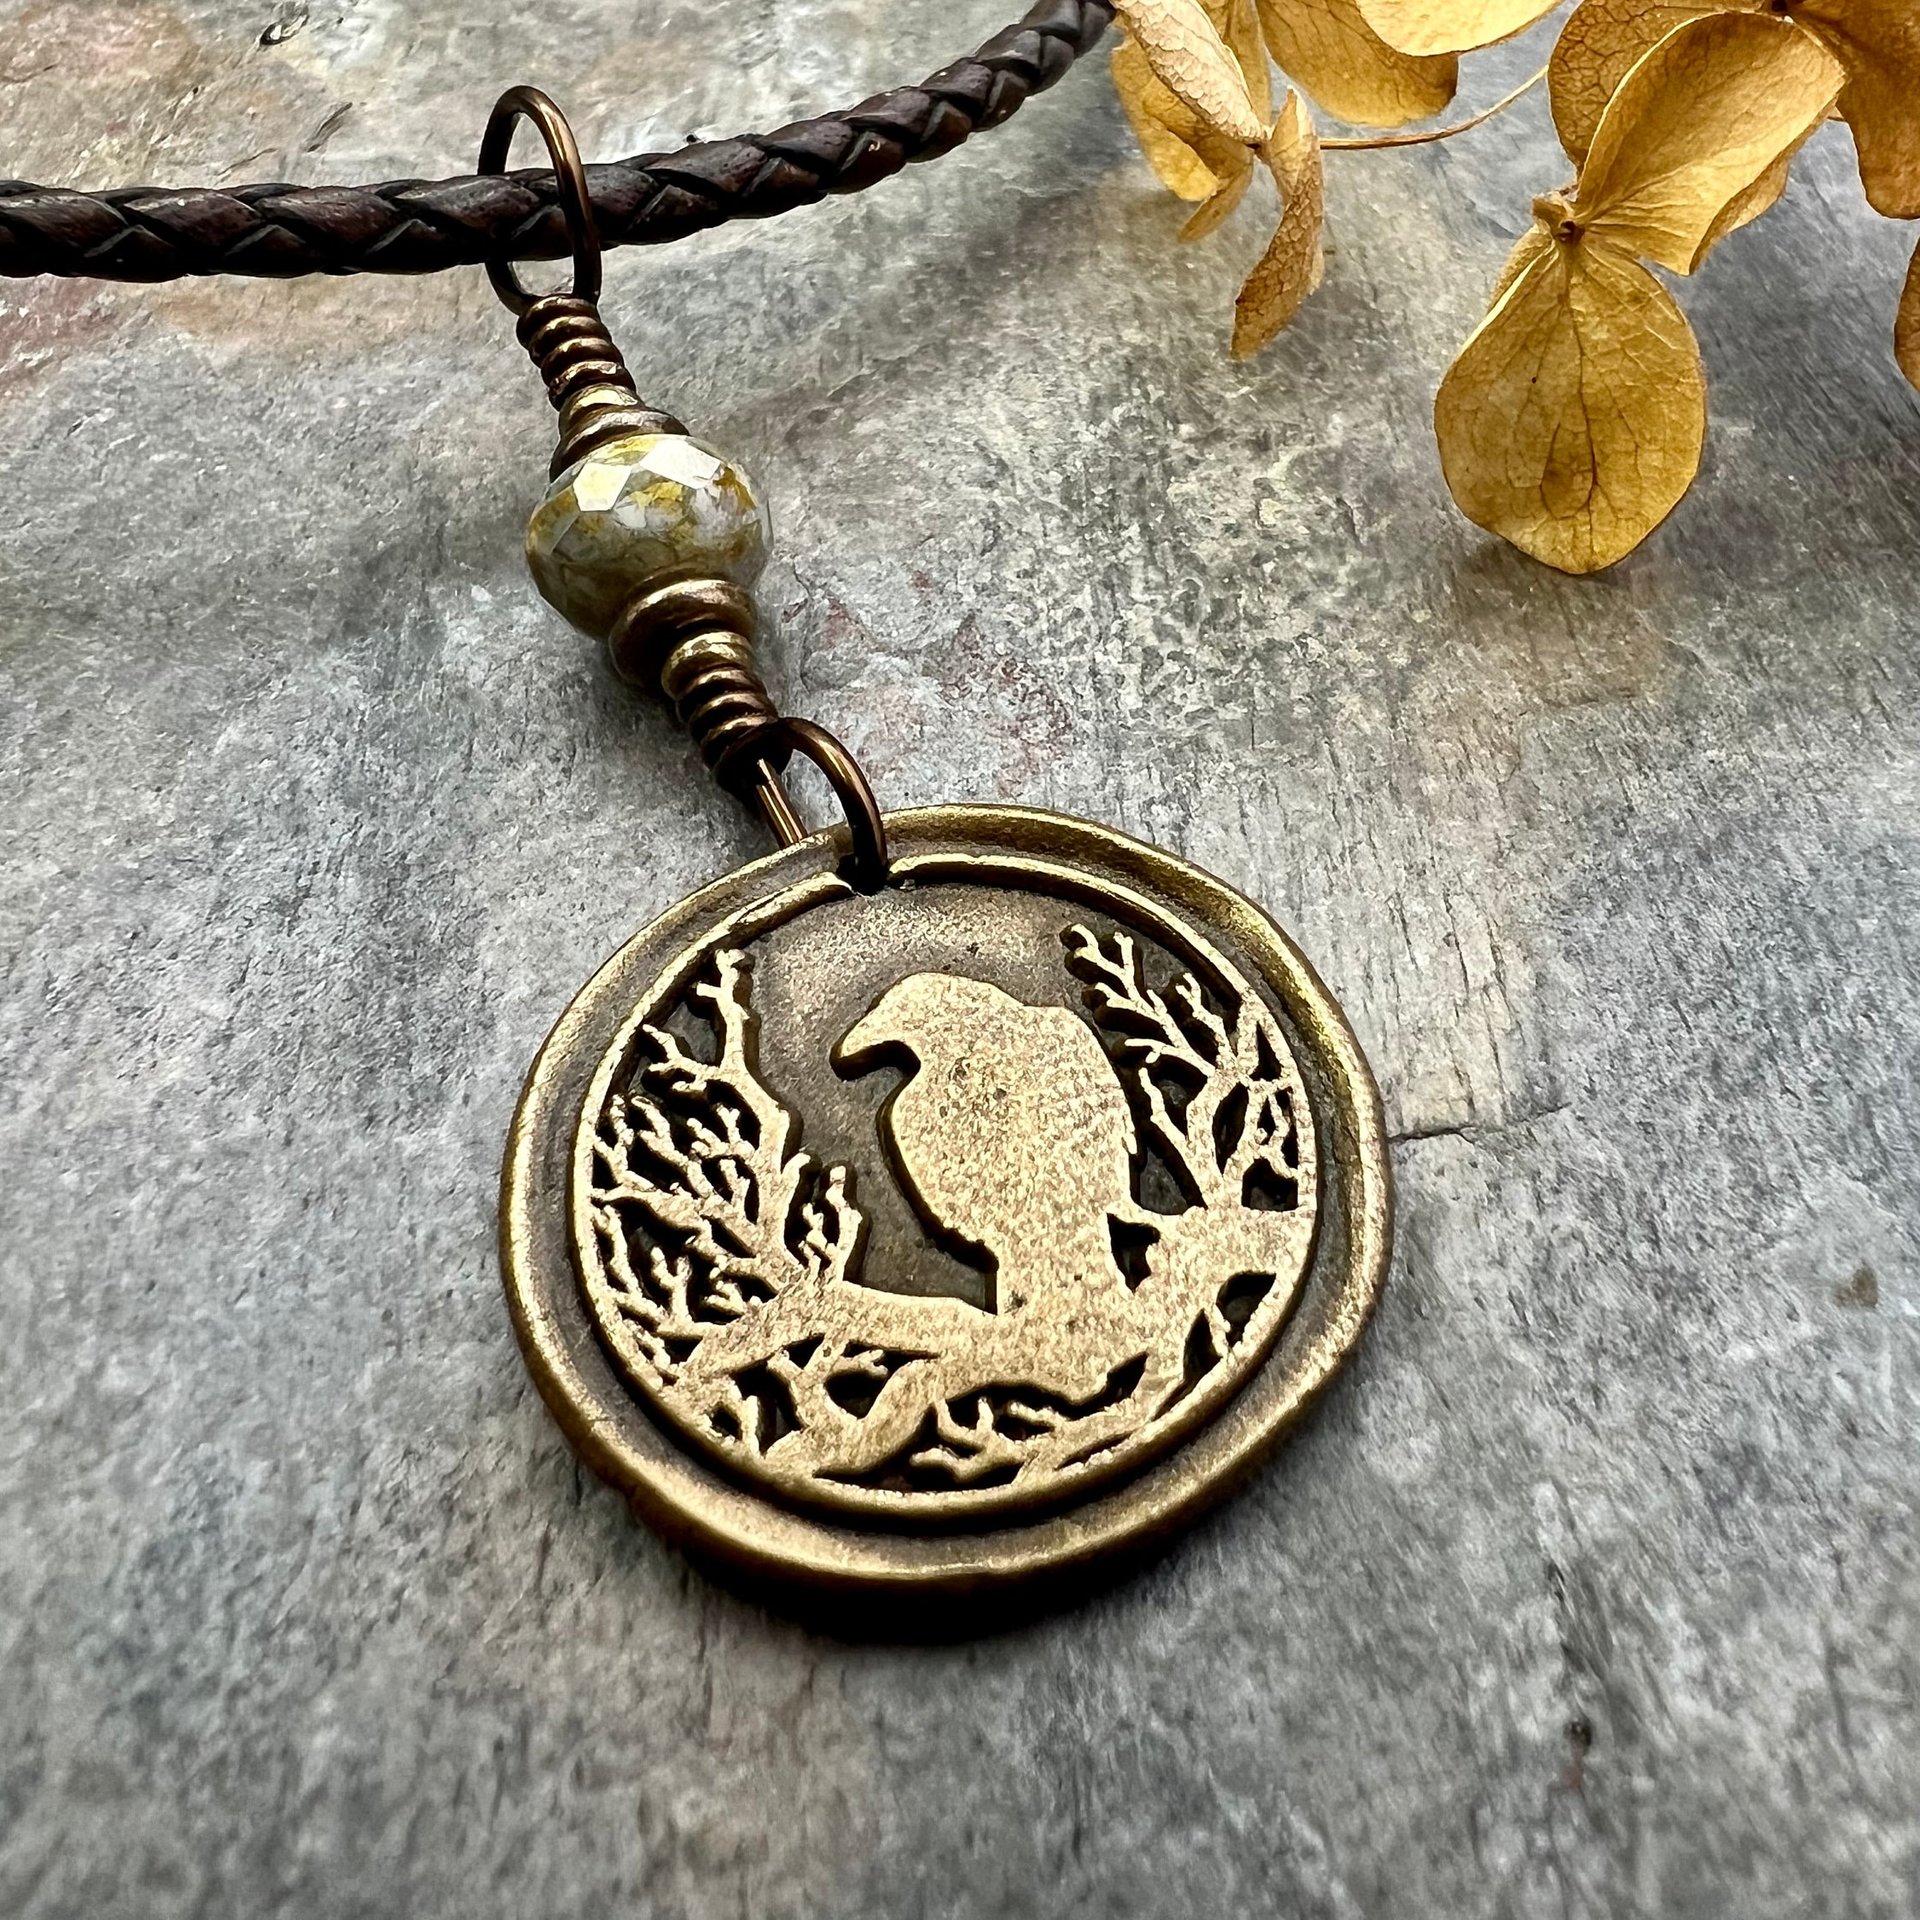 Raven Bronze Pendant, Wax Seal Charm, Czech Glass Bead, Crow Corvid, Tree Branches, Pagan Samhain, Celtic Witch Jewelry, Earthy Rustic